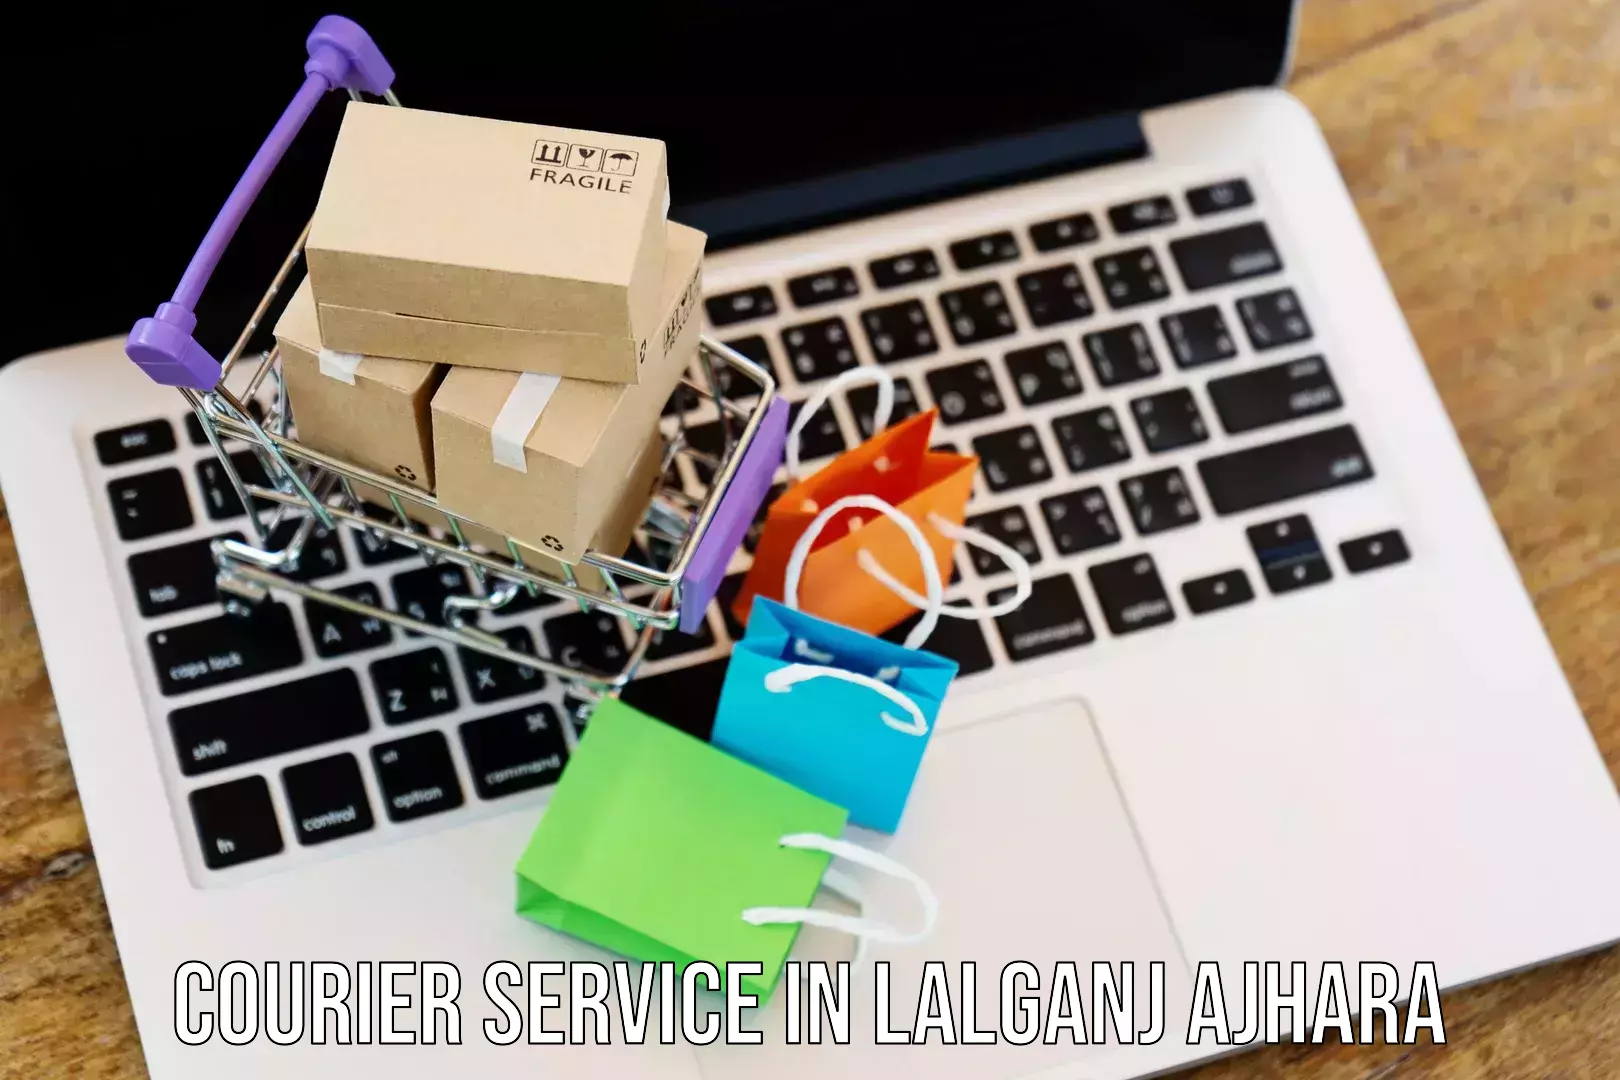 Subscription-based courier in Lalganj Ajhara